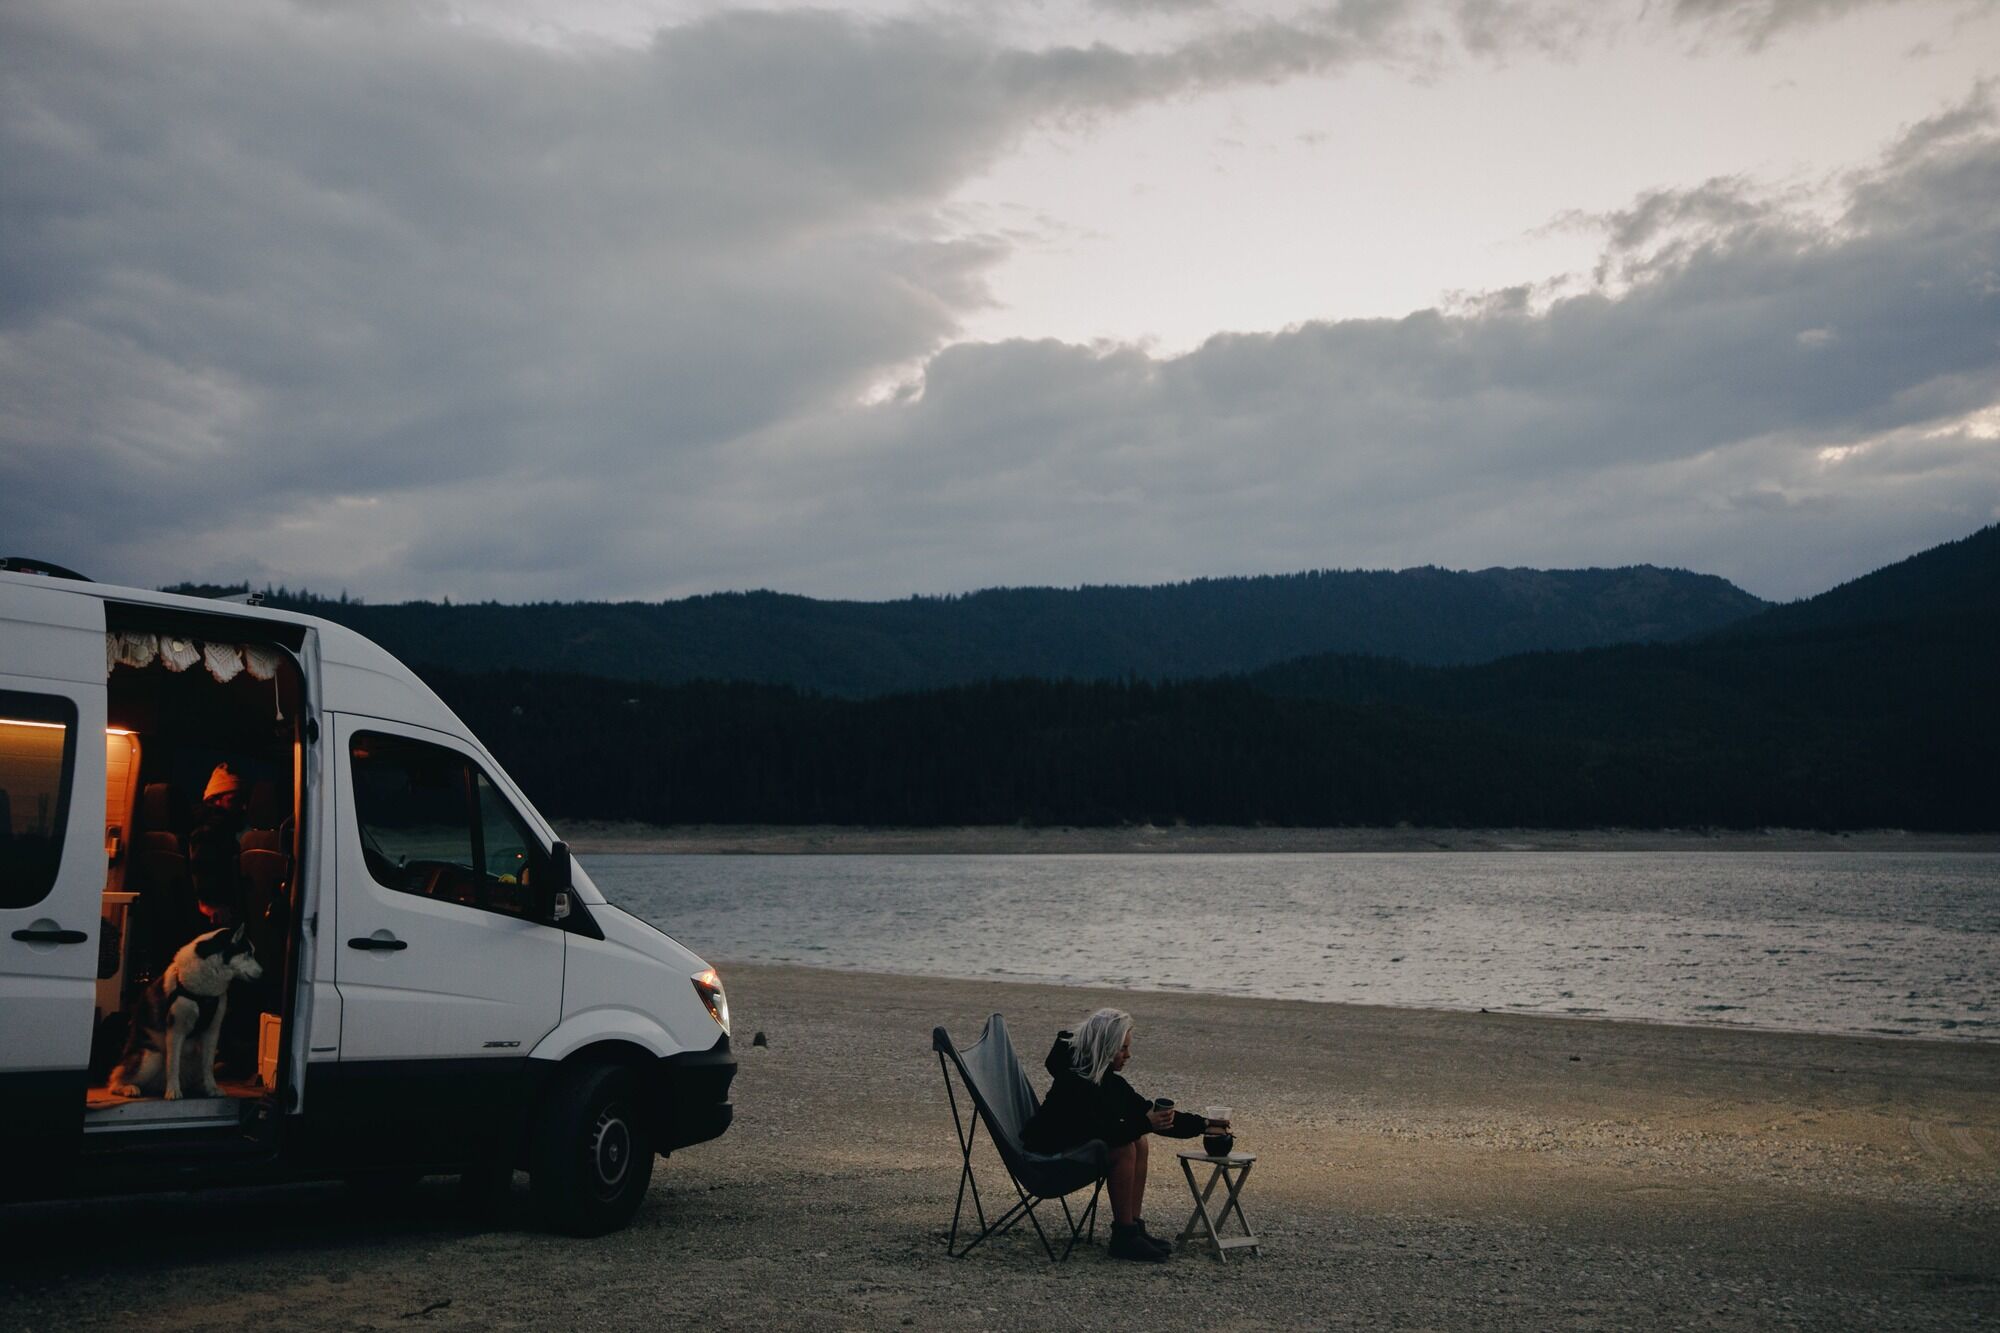 New Zealand introduces new strict rules for RVs: What you need to know